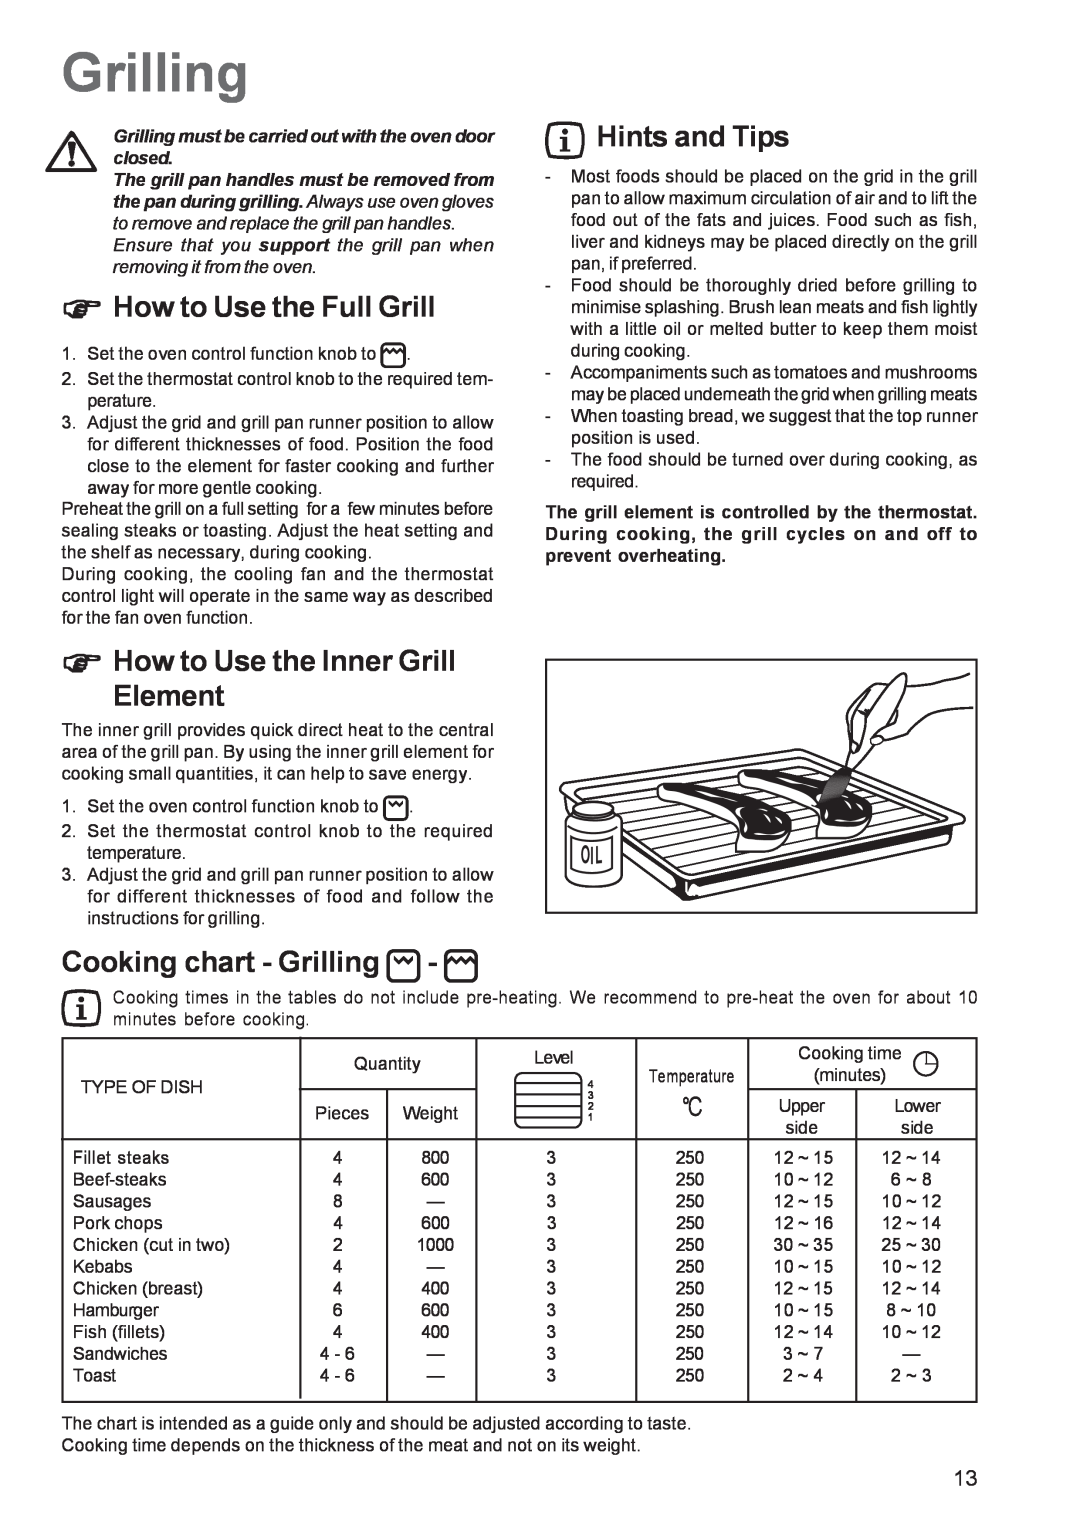 Zanussi ZBF 569 manual How to Use the Full Grill, How to Use the Inner Grill Element, Cooking chart - Grilling 